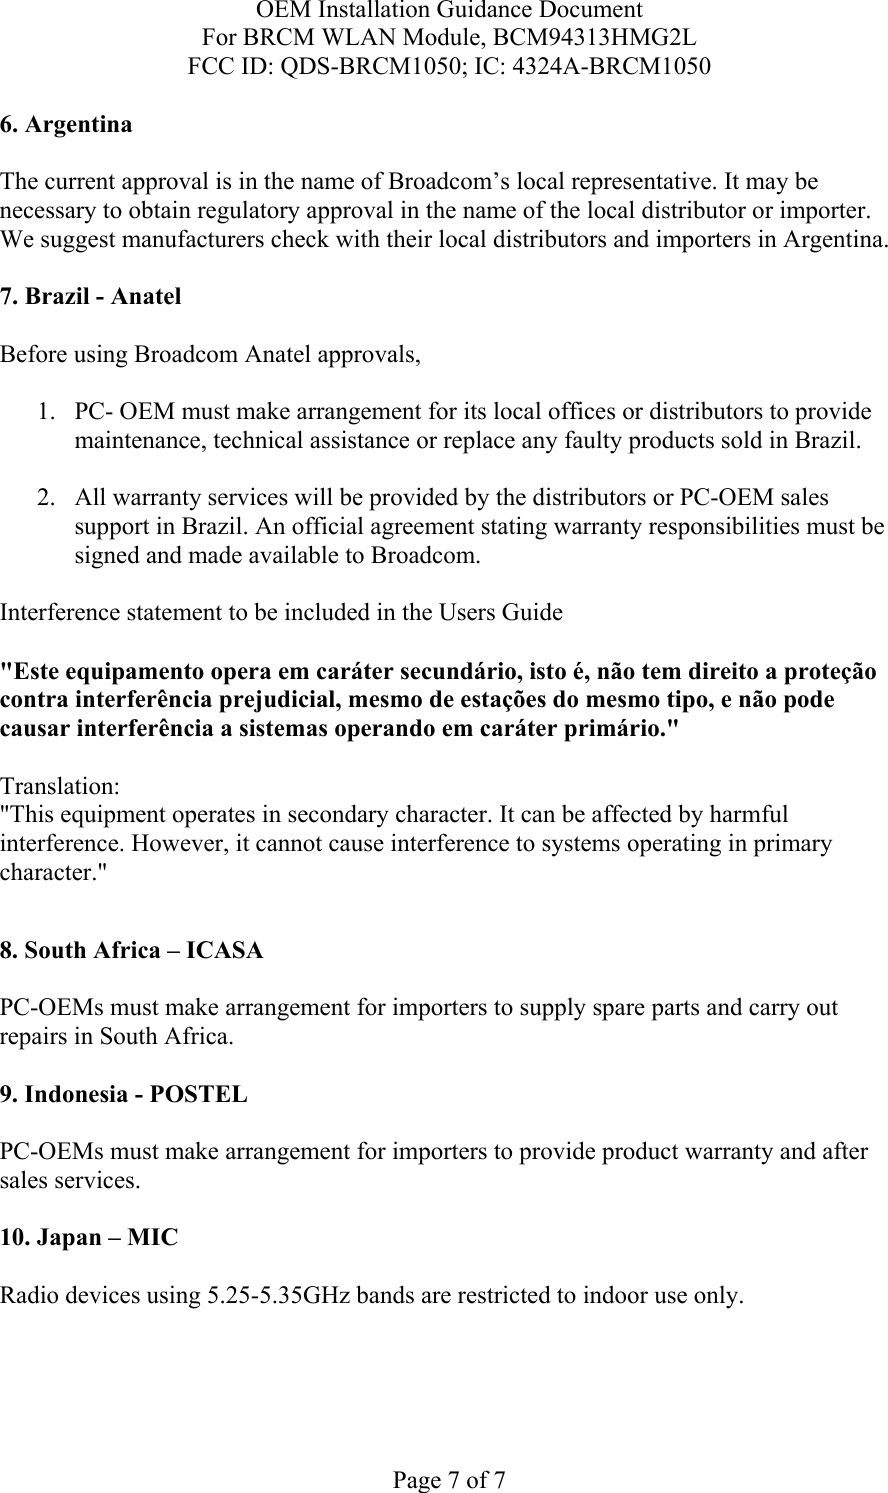 OEM Installation Guidance Document For BRCM WLAN Module, BCM94313HMG2L FCC ID: QDS-BRCM1050; IC: 4324A-BRCM1050  Page 7 of 7 6. Argentina   The current approval is in the name of Broadcom’s local representative. It may be necessary to obtain regulatory approval in the name of the local distributor or importer. We suggest manufacturers check with their local distributors and importers in Argentina.  7. Brazil - Anatel   Before using Broadcom Anatel approvals,   1. PC- OEM must make arrangement for its local offices or distributors to provide maintenance, technical assistance or replace any faulty products sold in Brazil.   2. All warranty services will be provided by the distributors or PC-OEM sales support in Brazil. An official agreement stating warranty responsibilities must be signed and made available to Broadcom.   Interference statement to be included in the Users Guide &quot;Este equipamento opera em caráter secundário, isto é, não tem direito a proteção contra interferência prejudicial, mesmo de estações do mesmo tipo, e não pode causar interferência a sistemas operando em caráter primário.&quot; Translation:  &quot;This equipment operates in secondary character. It can be affected by harmful interference. However, it cannot cause interference to systems operating in primary character.&quot;    8. South Africa – ICASA  PC-OEMs must make arrangement for importers to supply spare parts and carry out repairs in South Africa.  9. Indonesia - POSTEL  PC-OEMs must make arrangement for importers to provide product warranty and after sales services.   10. Japan – MIC  Radio devices using 5.25-5.35GHz bands are restricted to indoor use only.  